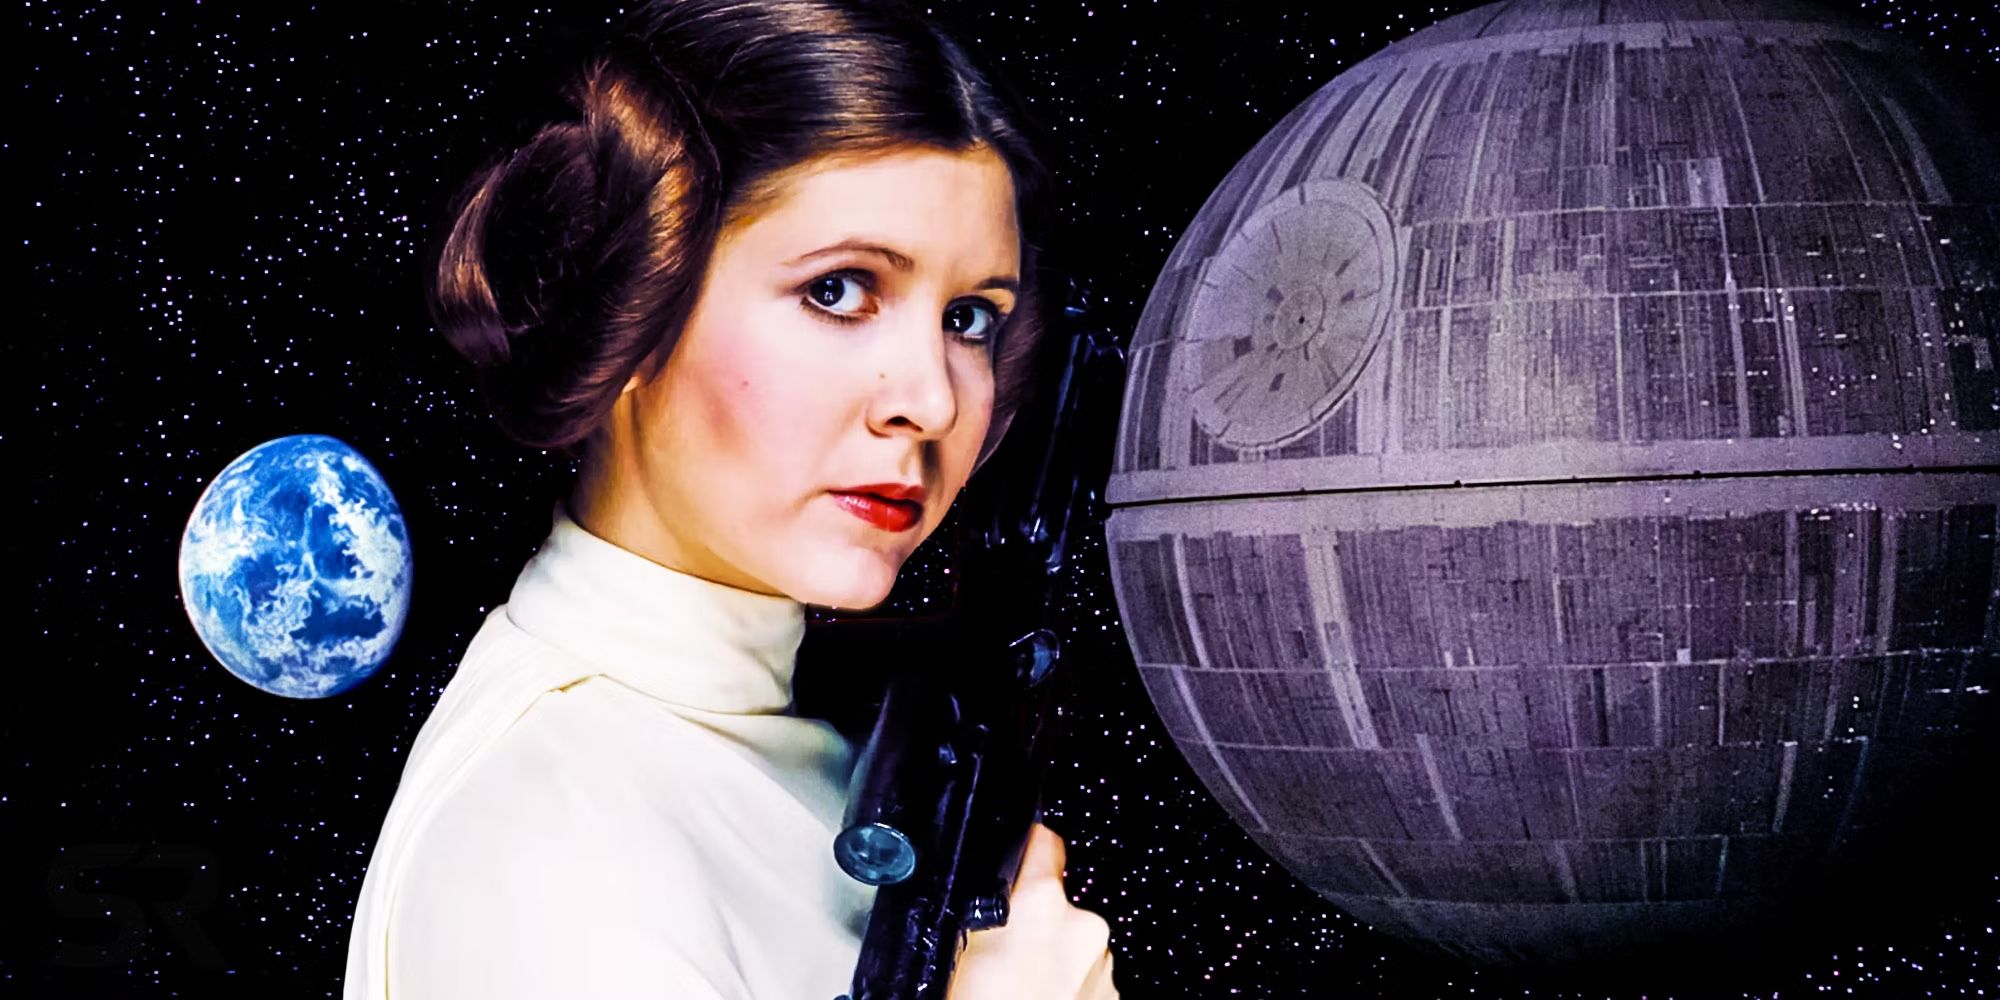 Princess Leia in A New Hope with the Death Star